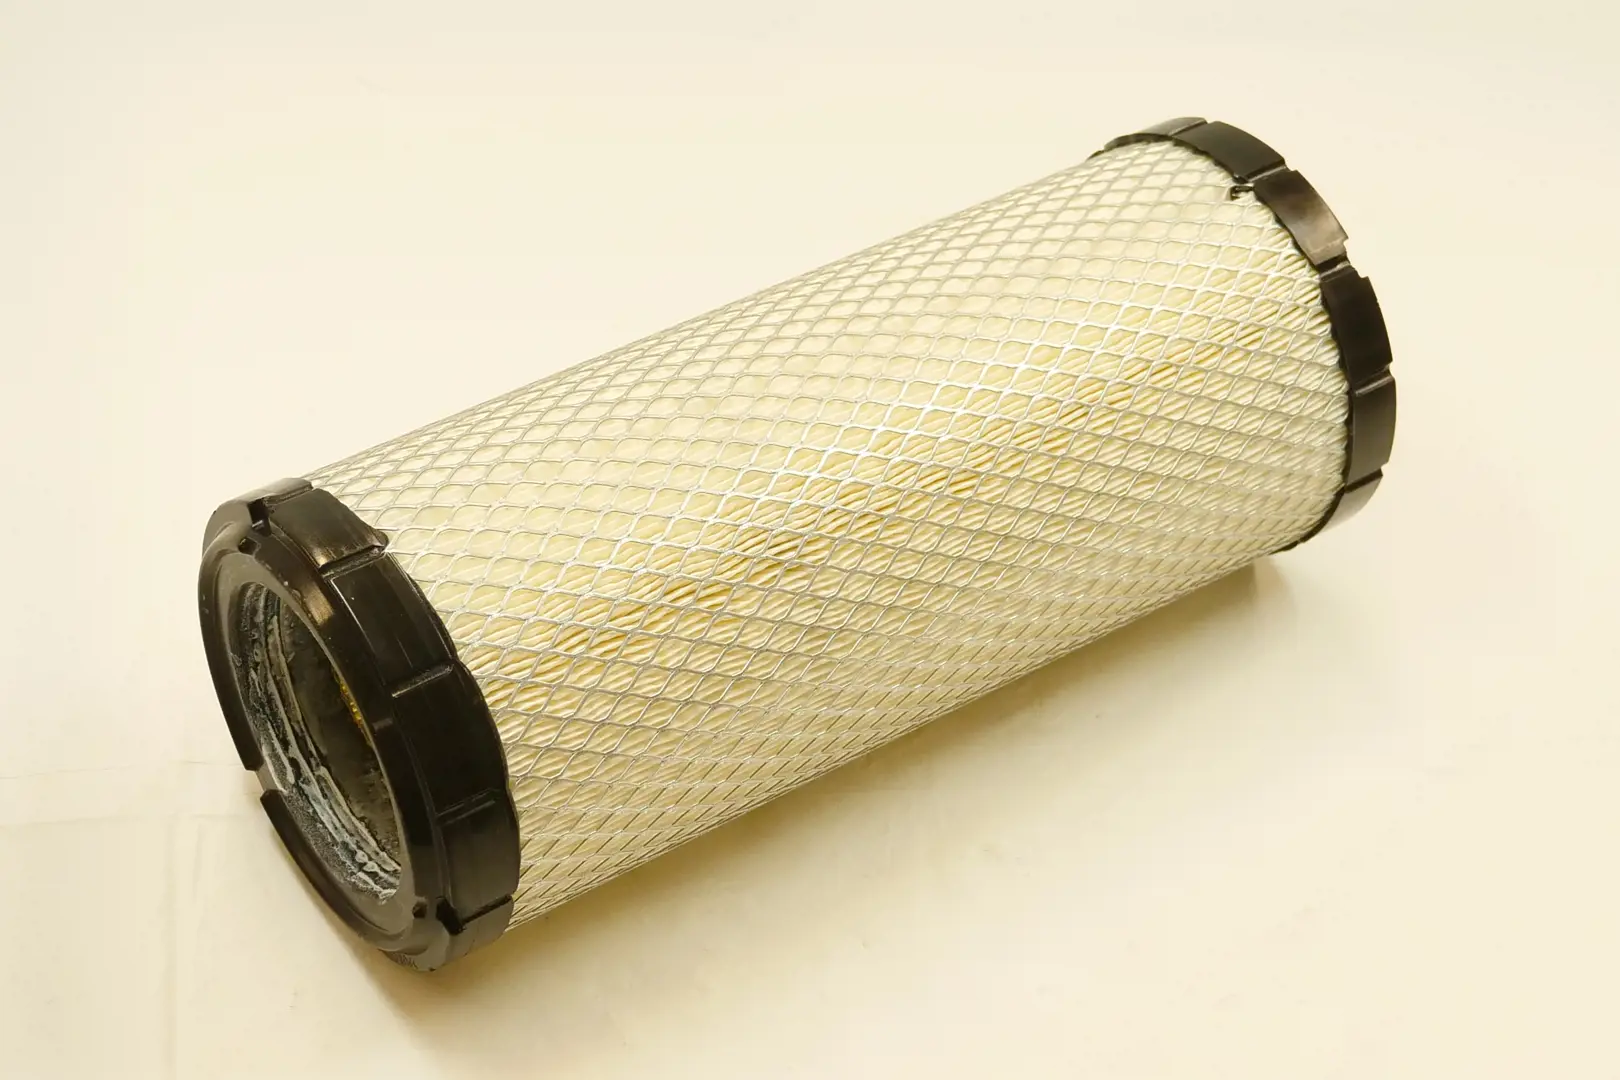 Image 1 for #R1401-42270 Outer Air Filter